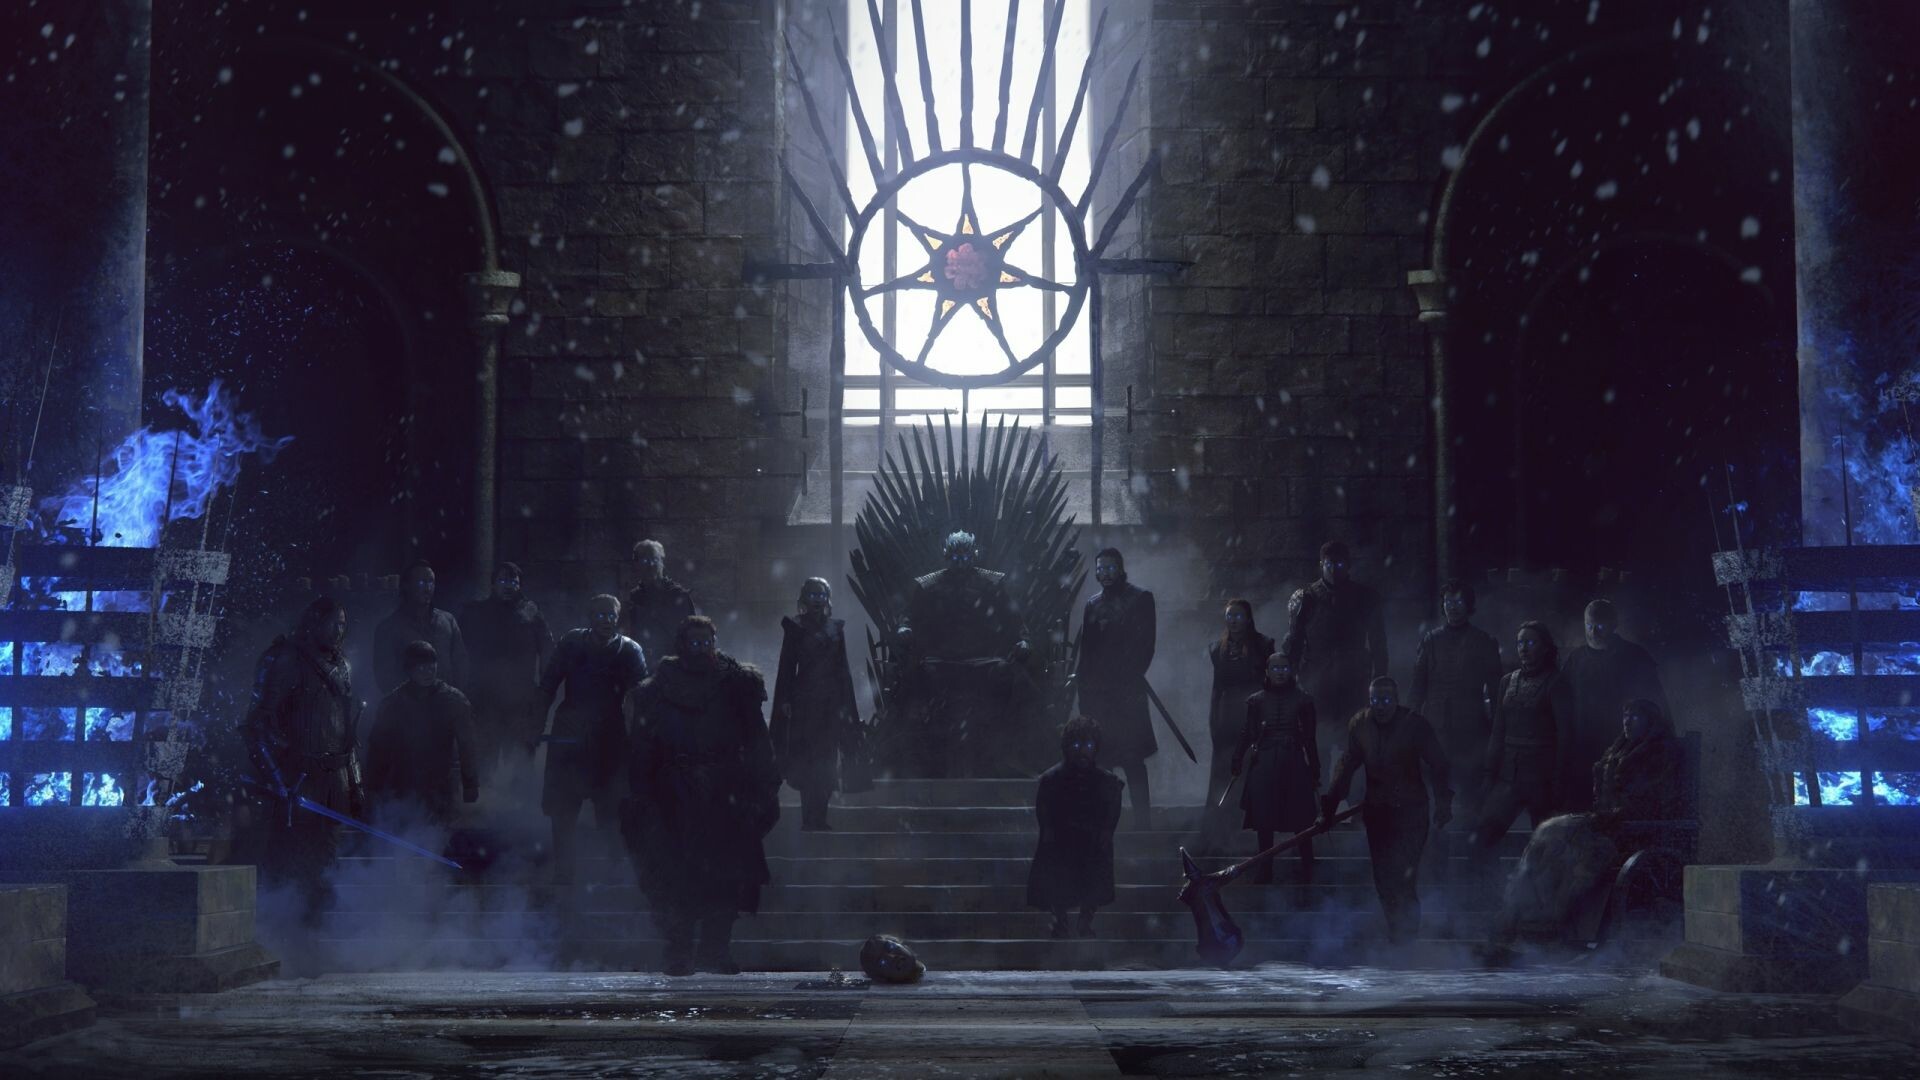 Game of Thrones: Zombies army, Night King, Iron Throne. 1920x1080 Full HD Wallpaper.